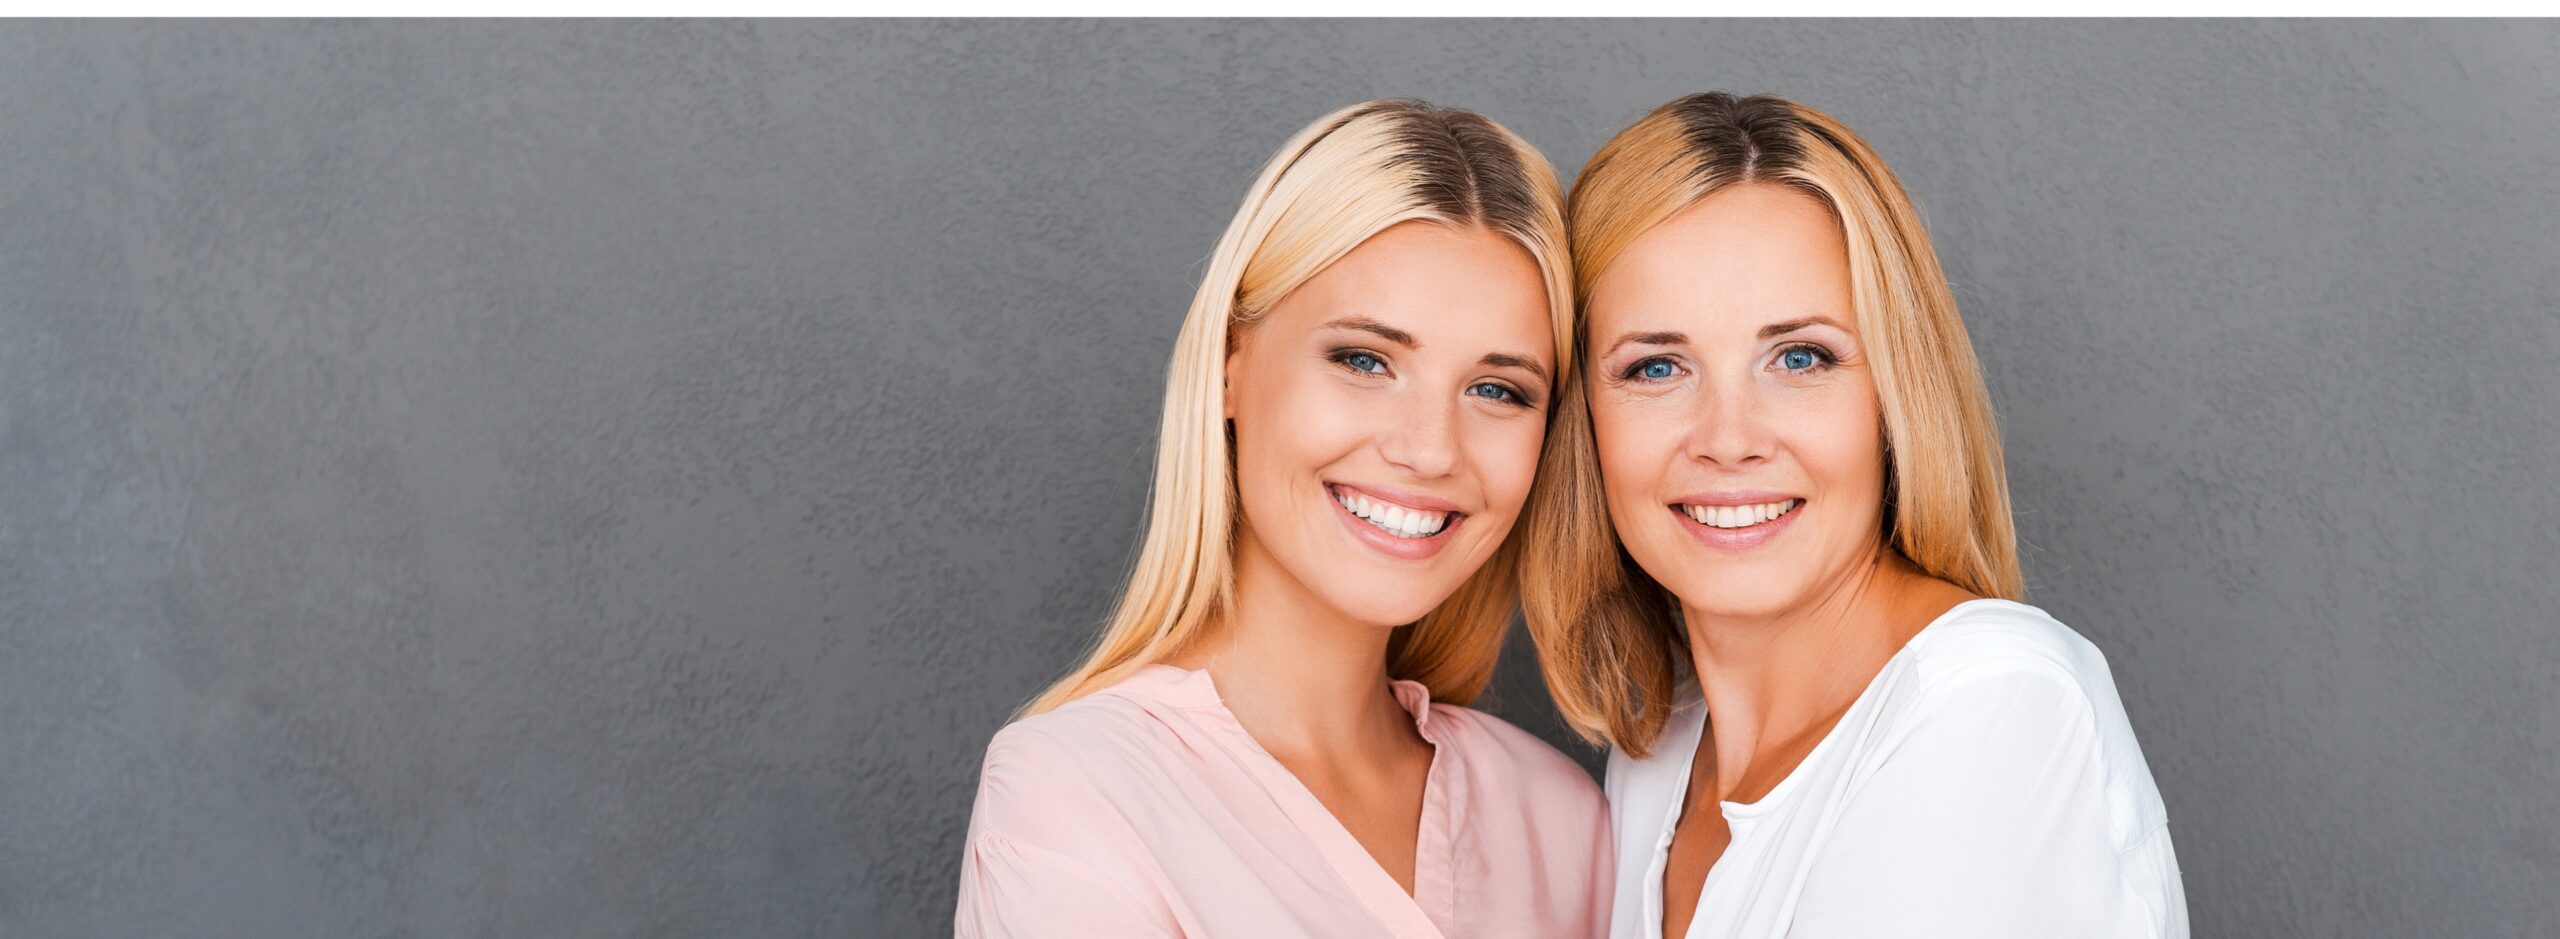 two women with blonde hair smiling and standing against a grey background